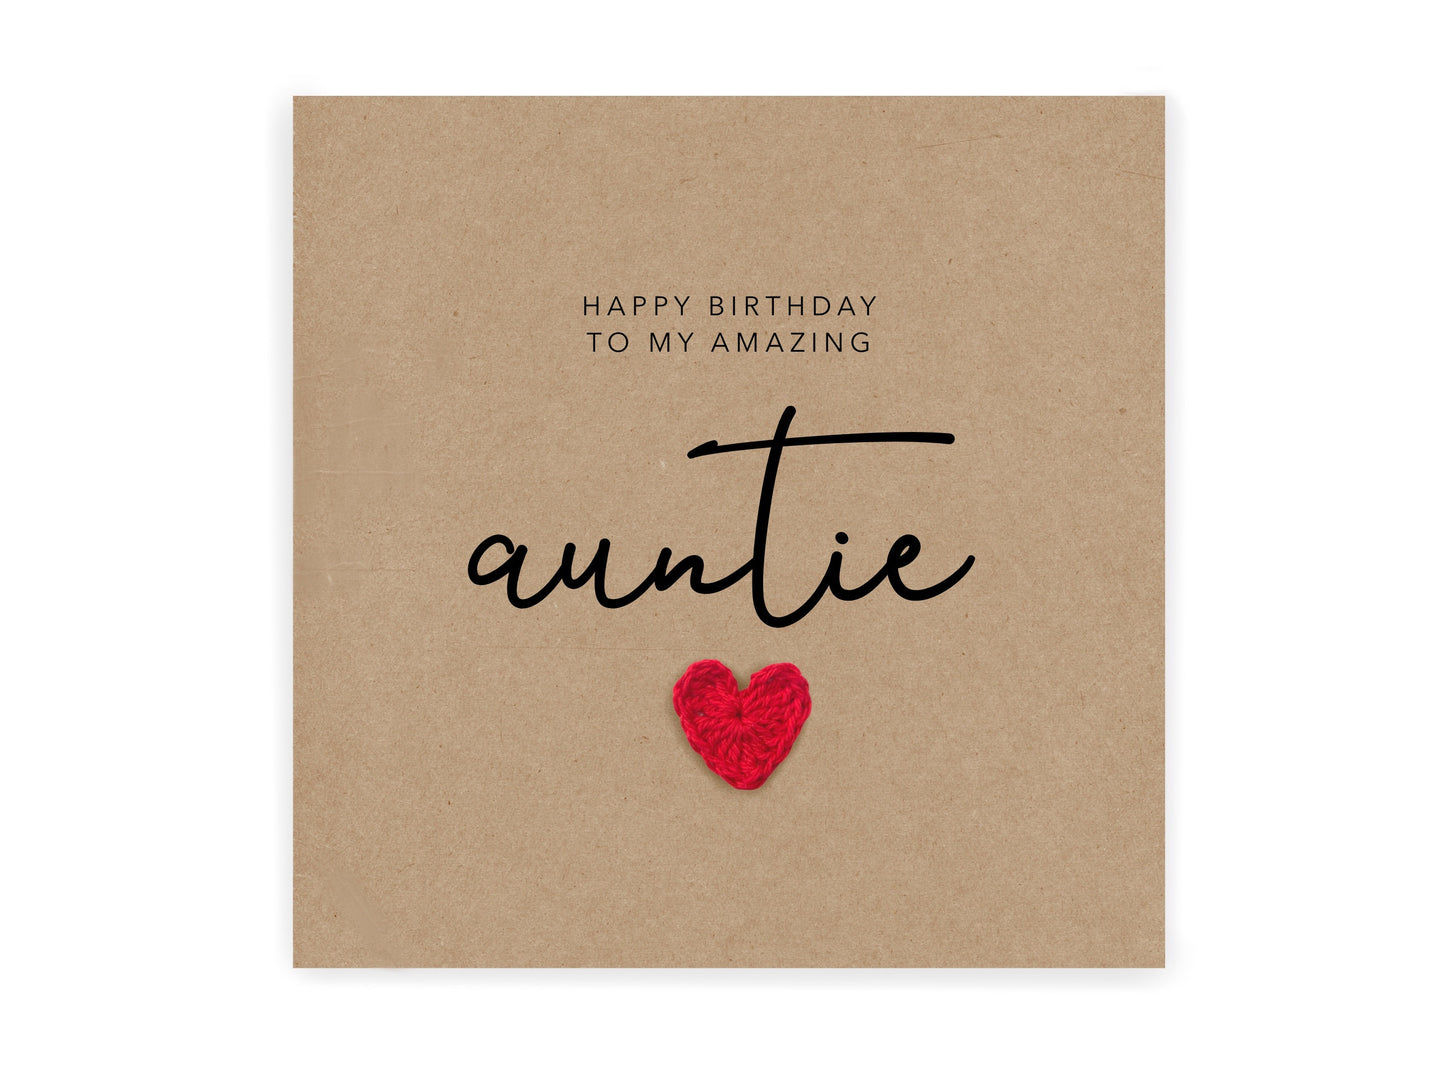 Happy Birthday To My Amazing Auntie, Aunite Birthday, Happy Birthday Auntie Card from Niece Nephew, Birthday Card Uncle, Card for Him